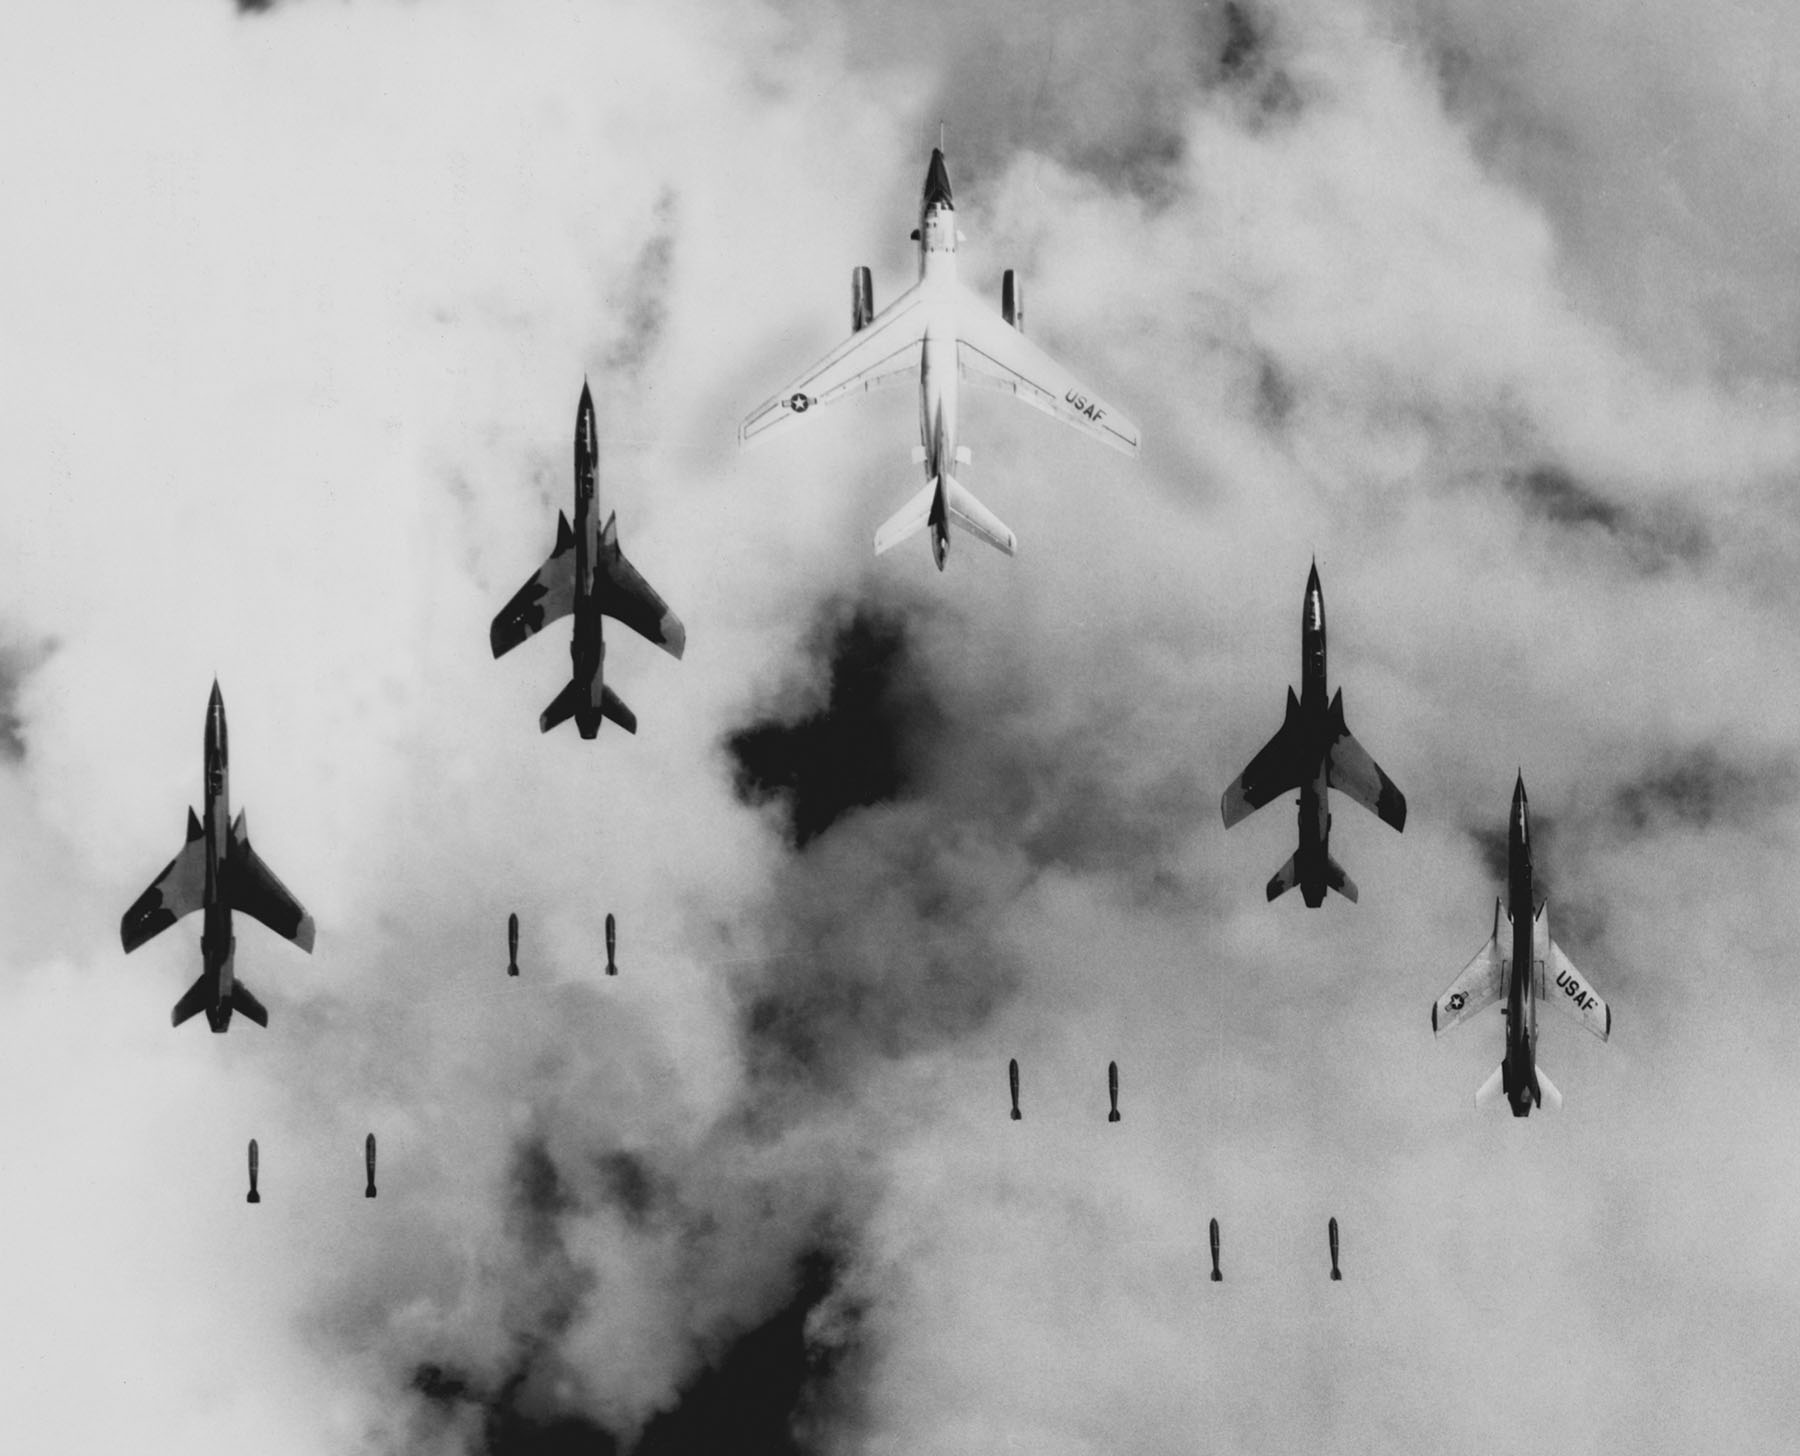 Thud F105 jets in formation